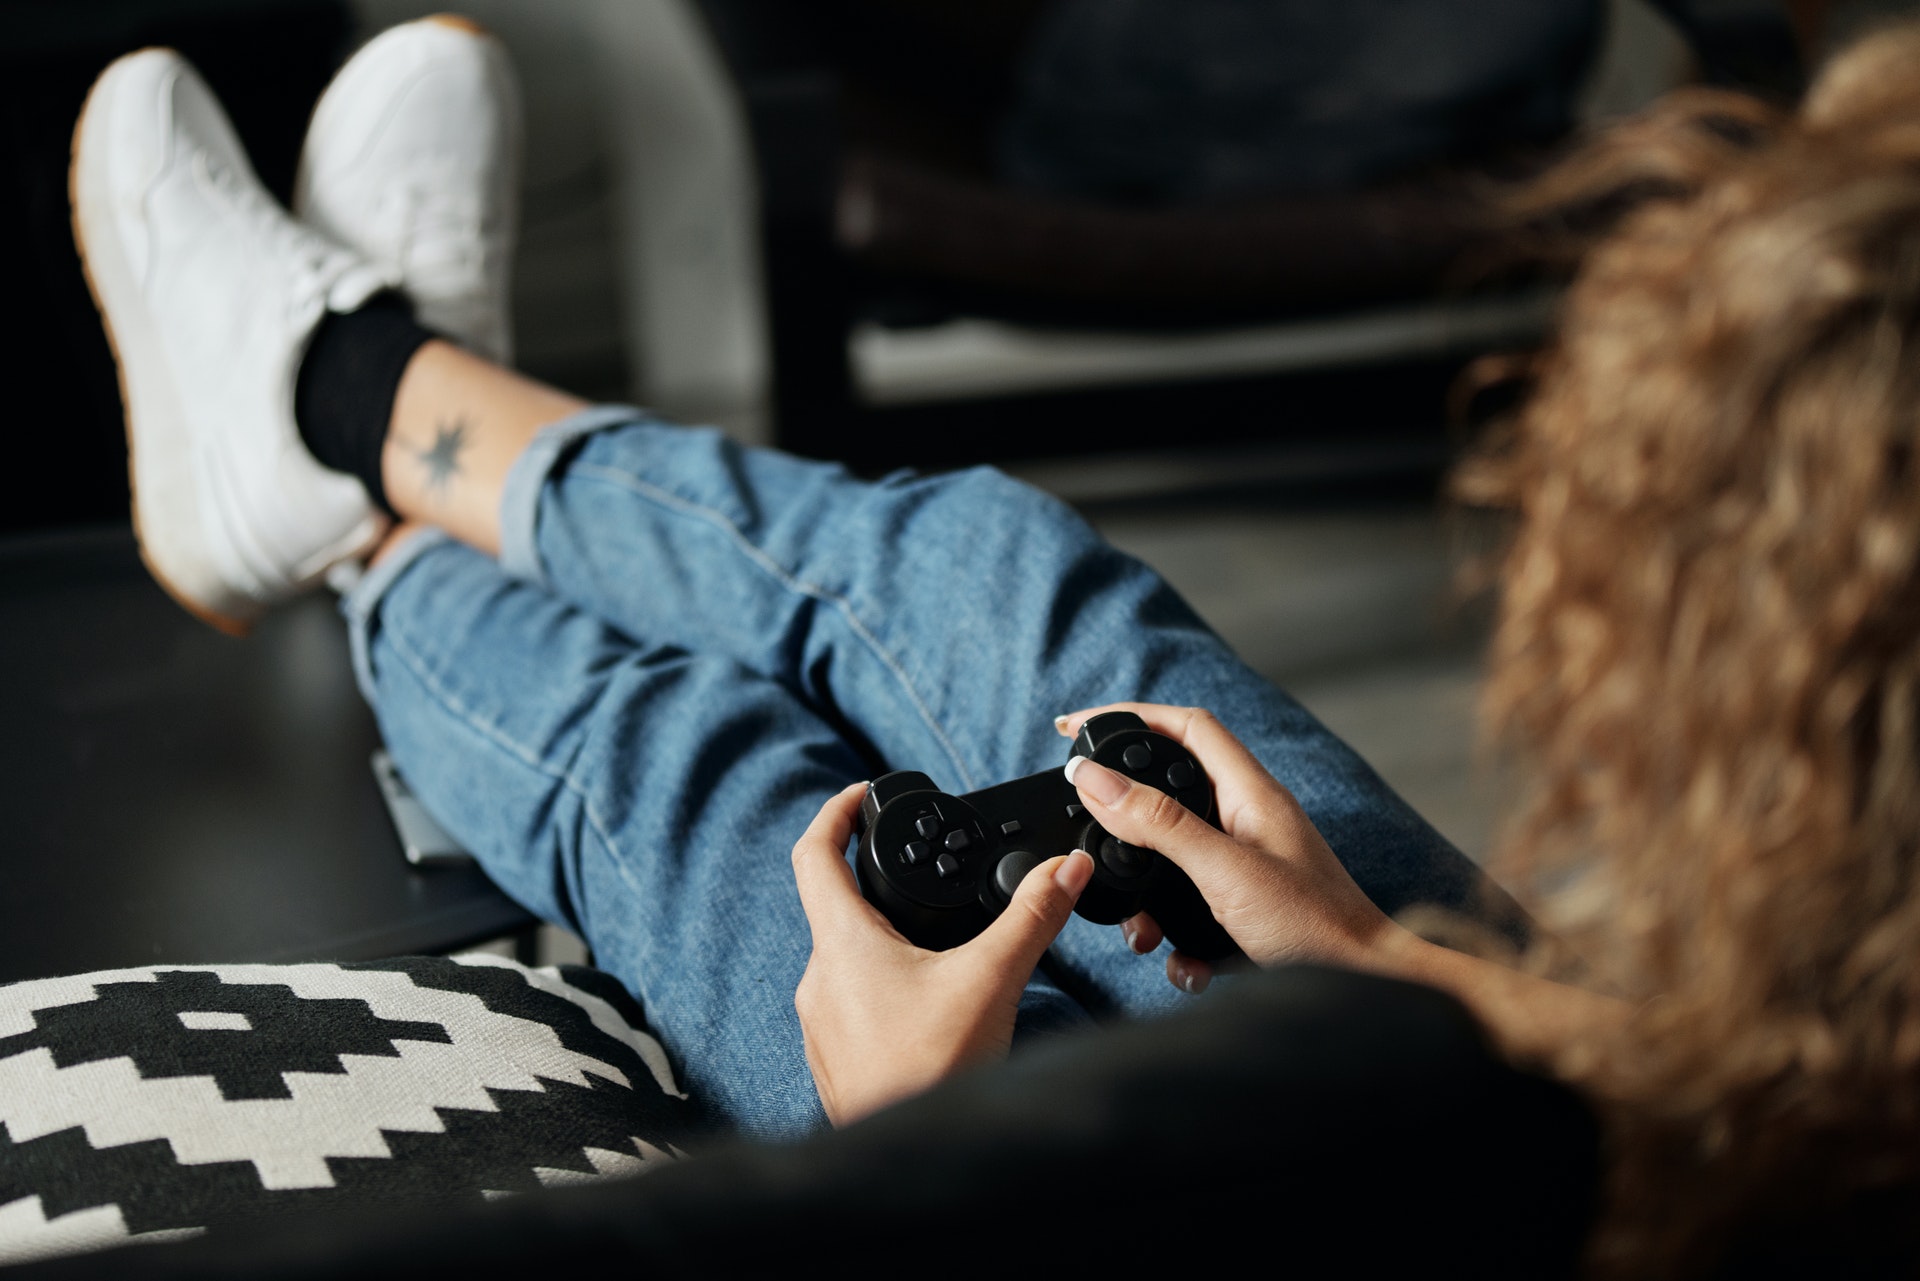 Are Video Games Helpful or Harmful? 11 Considerations